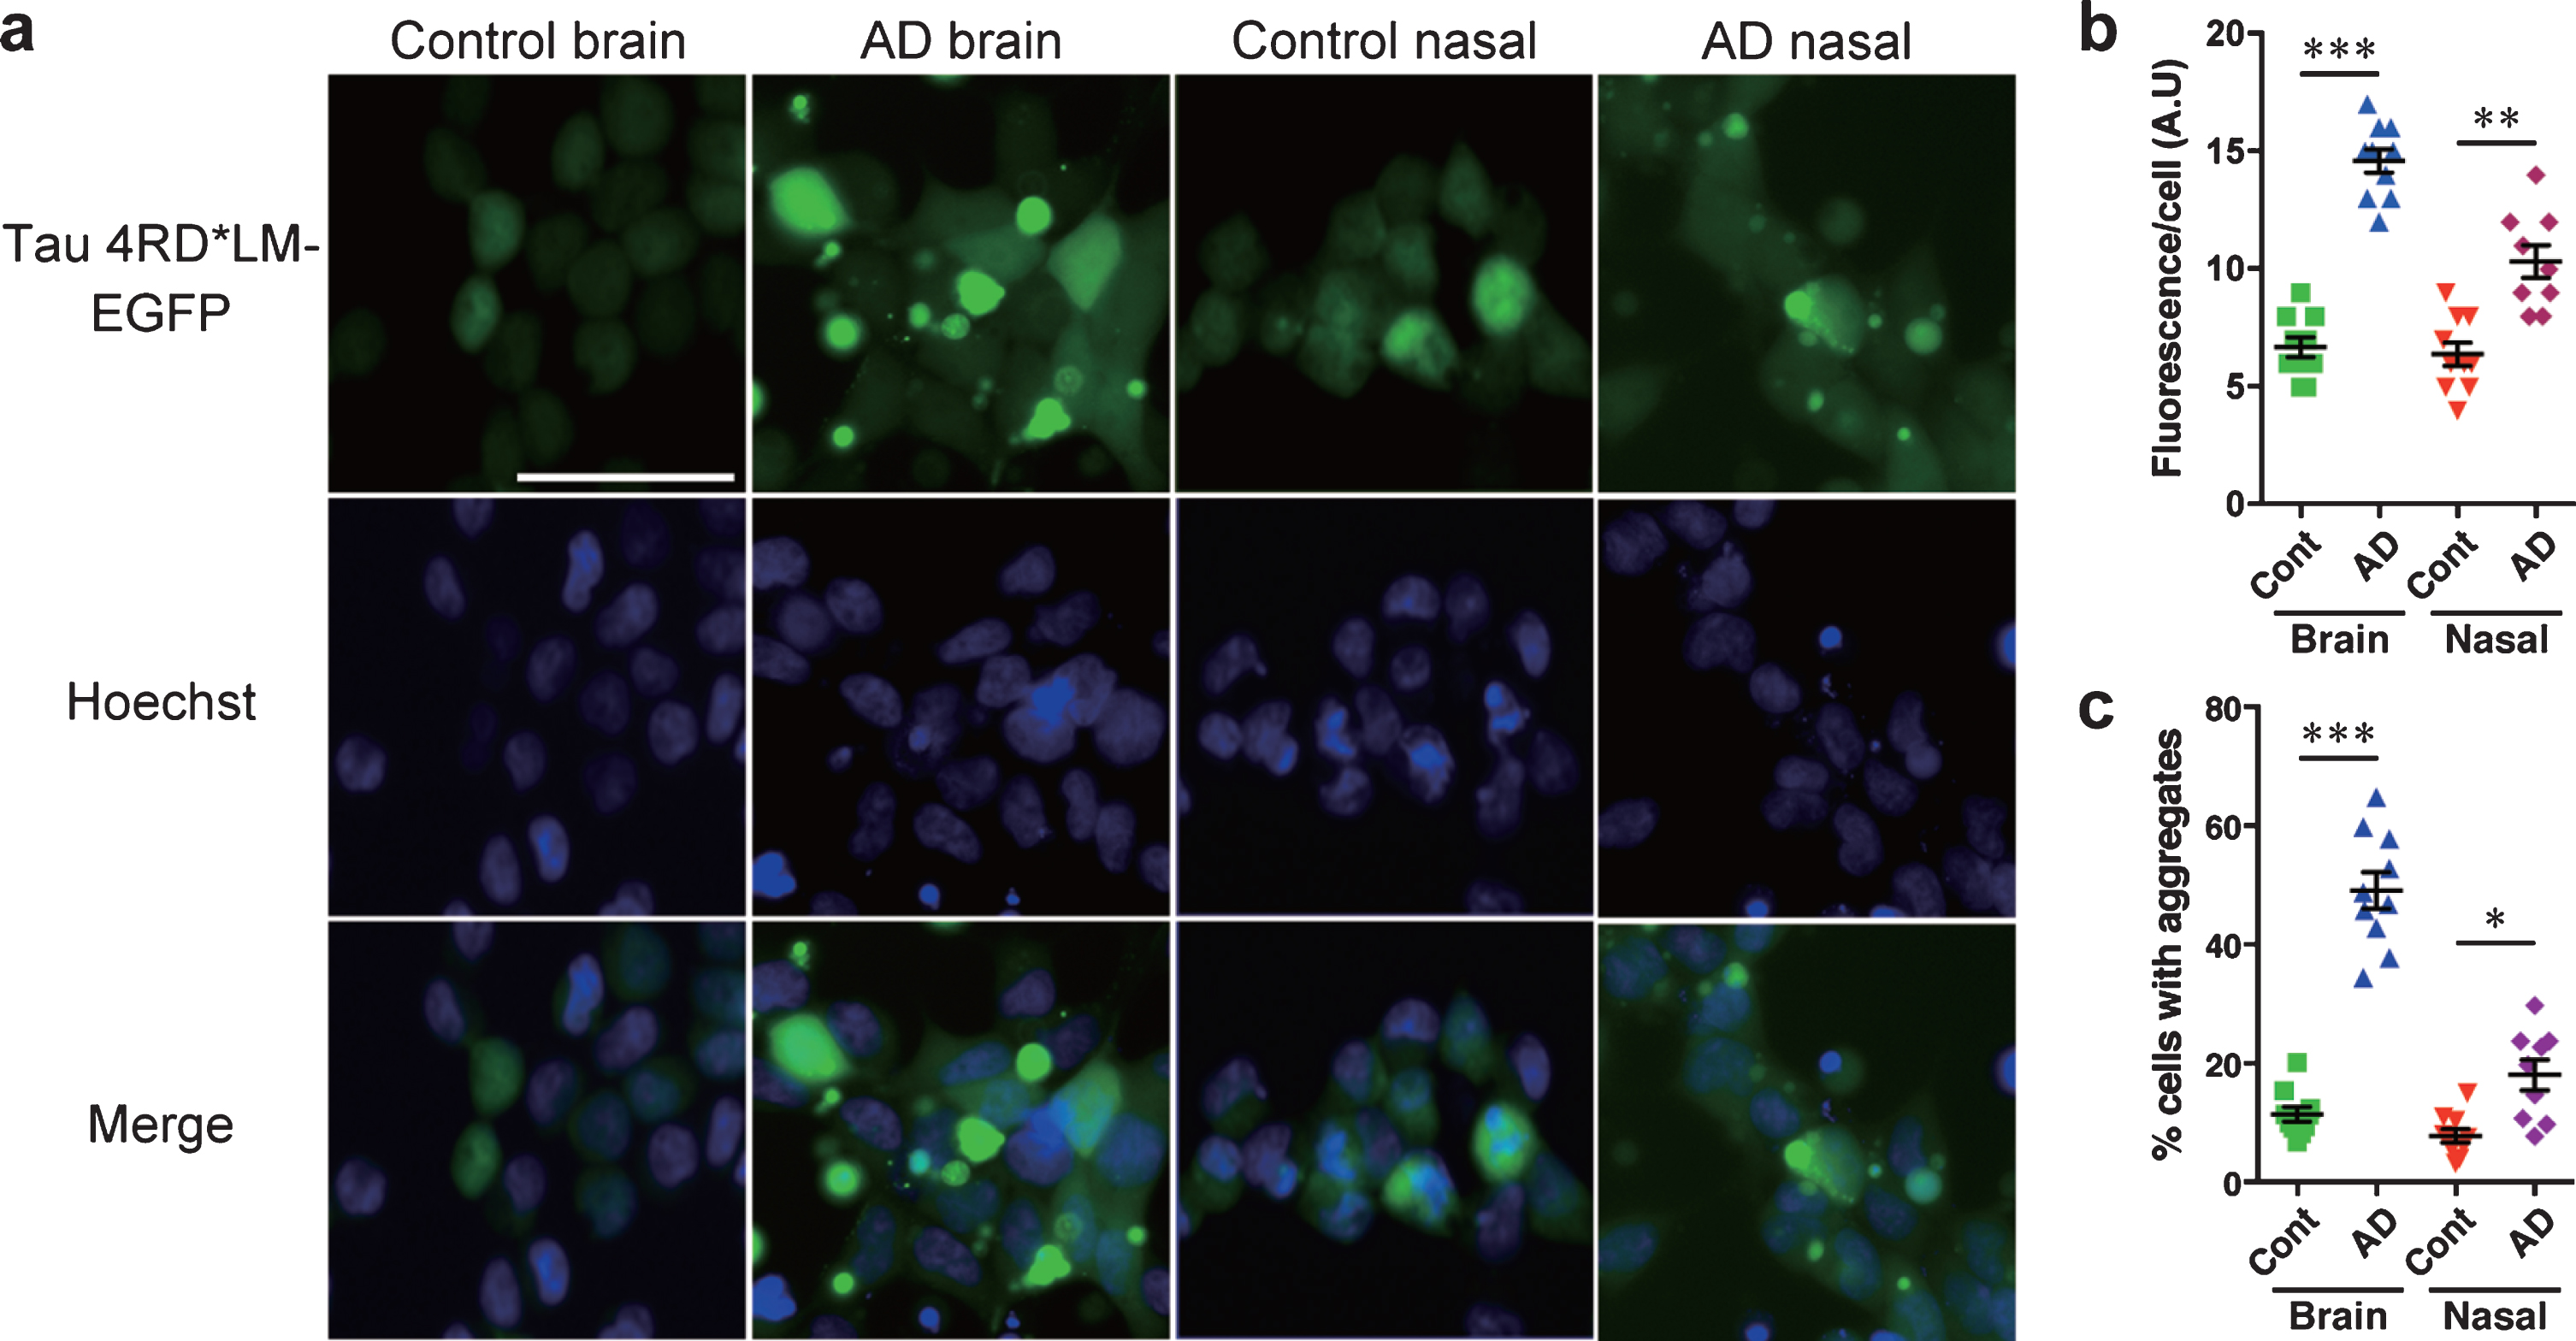 HEK 293T cells stably expressing tau 4RD*LM-EGFP detect tau prions in the brain and nasal tissue homogenates from patients with AD. The same methods were applied as those described for HEK293T cells stably expressing tau 3RD*VM-EGFP. a) Representative images of HEK 293T cells expressing 4RD*LM-EGFP seeded with the brain and nasal tissue homogenates from control individuals and patients with AD. Scale bar = 50μm. Quantification of tau aggregation by (b) fluorescence per cell. Data are presented as the mean±SEM measured from ten samples per group, with the exception of AD nasal homogenates, for which nine samples were used, and (c) percentage of cells with aggregates. Data are presented as the mean±SEM measured from five images for each sample. **p < 0.001, ****p < 0.0001.